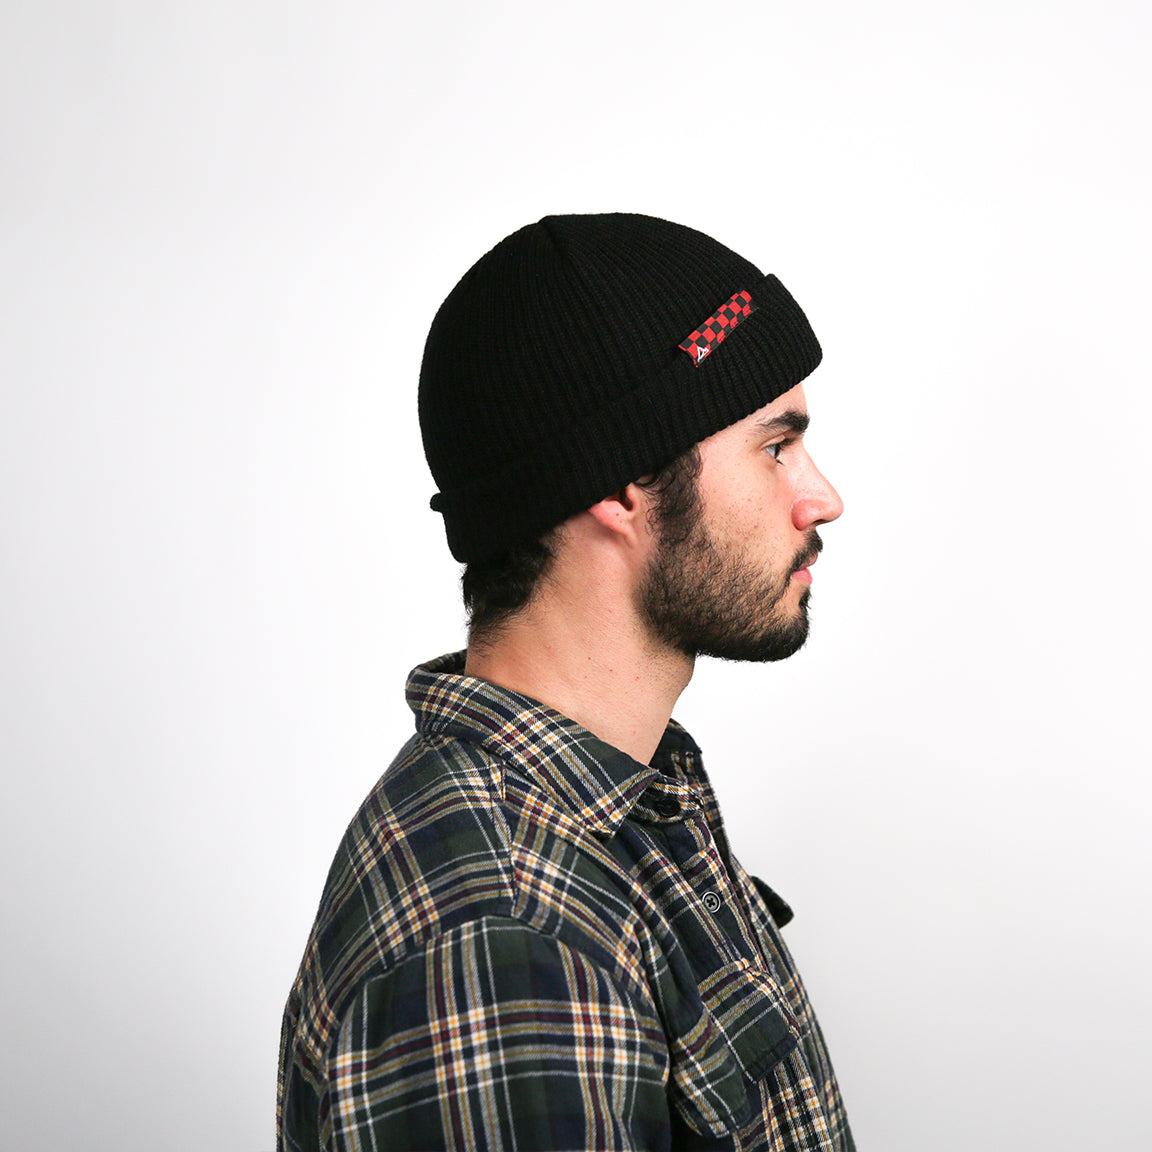 Here, the beanie is shown from the side with a red and black checkered logo patch, providing a slight variation in design while maintaining the overall look and feel.